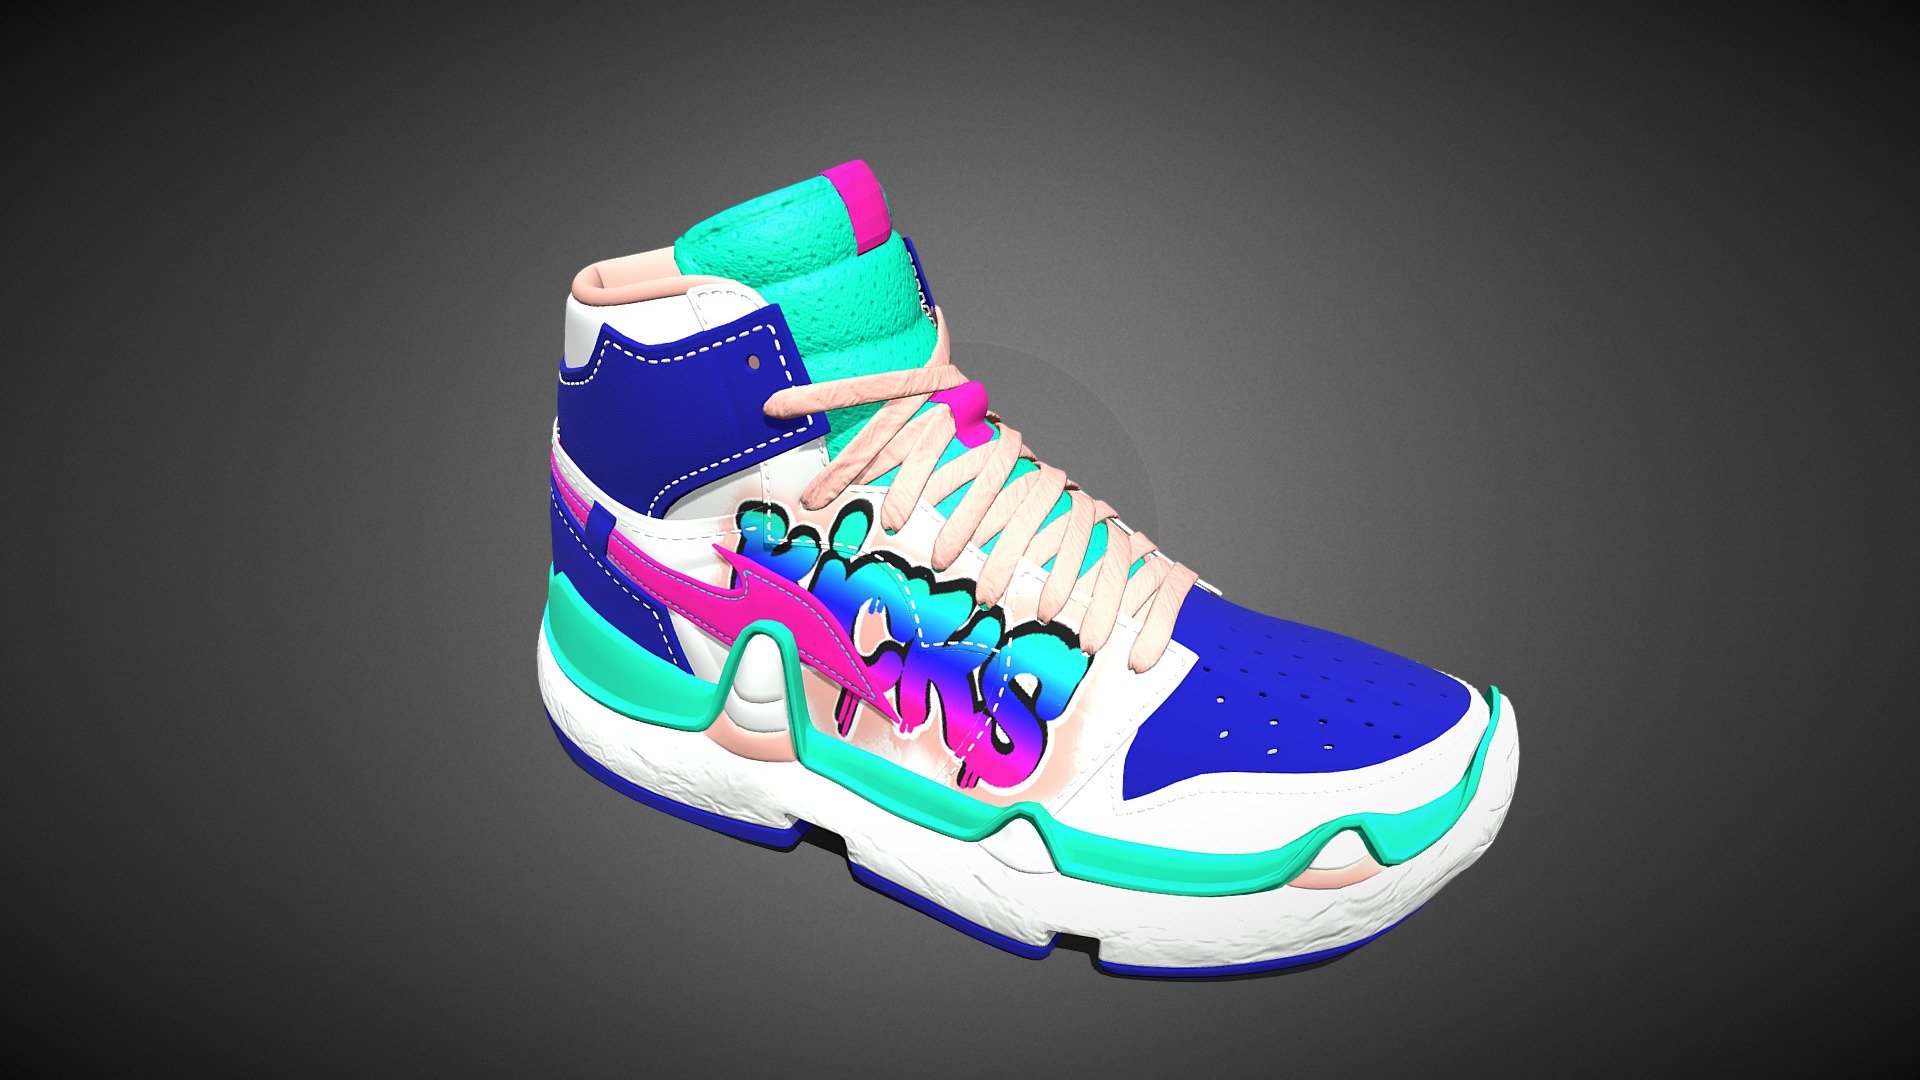 Thought of using a nickname for sneakers as a theme then this song popped in my head. 

Based on “RTFKT CREATOR ONE by RTFKT Studios, licensed under CC-Attribution.

RTFKTChallenge - #RTFKTChallenge Graffiti Kicks - Download Free 3D model by wilemben 3d model